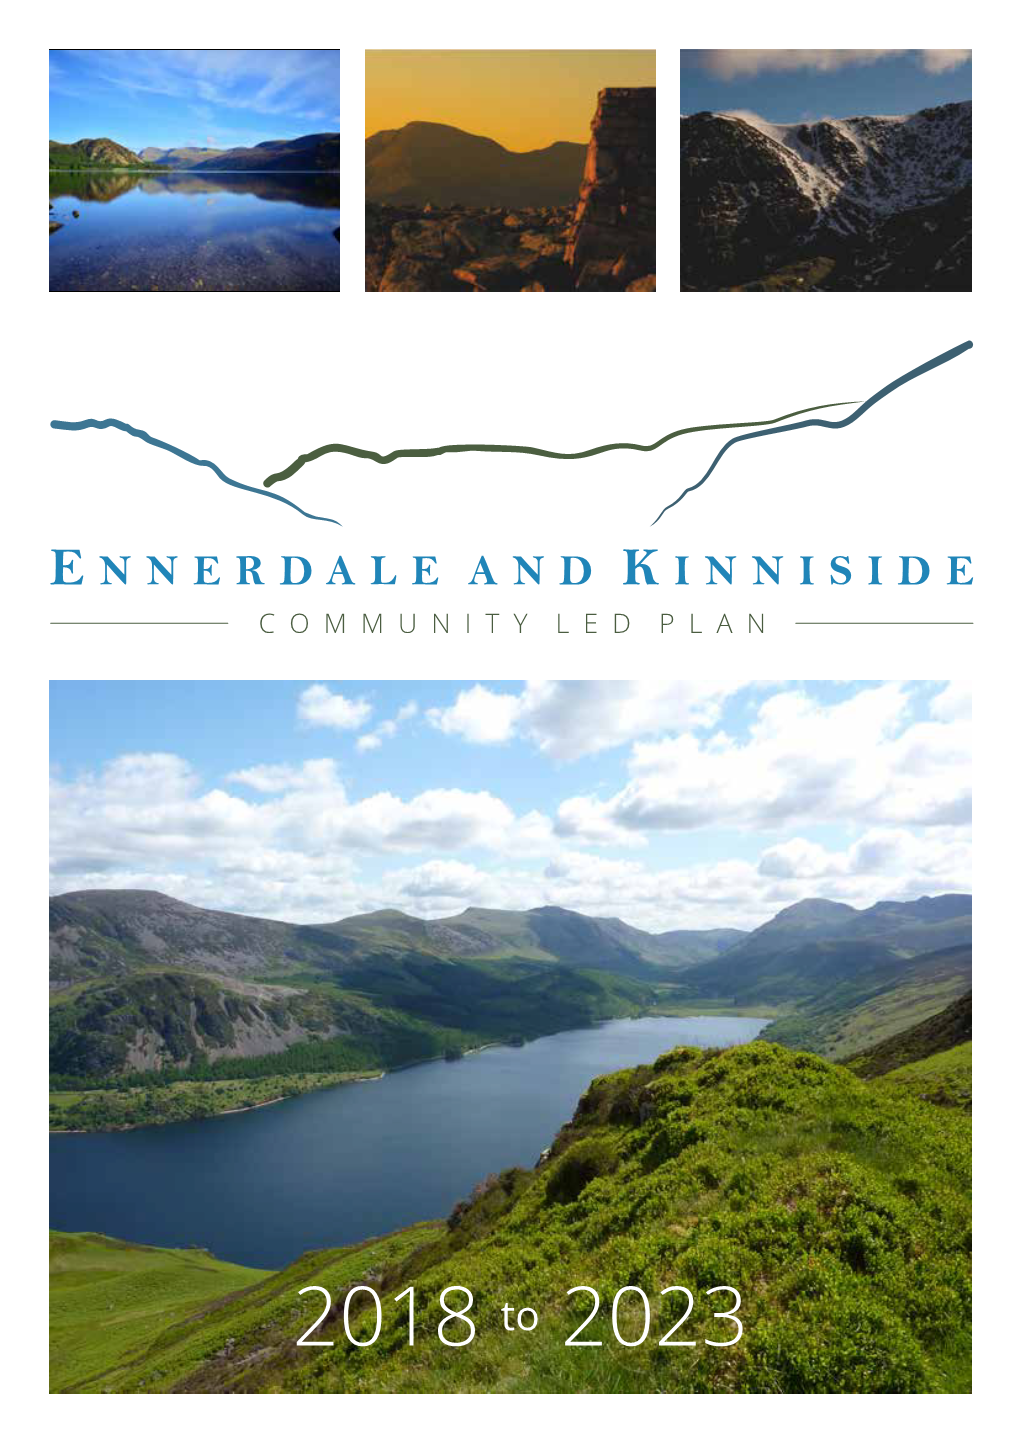 Ennerdale and Kinniside Community Led Plan 2017 to 2022